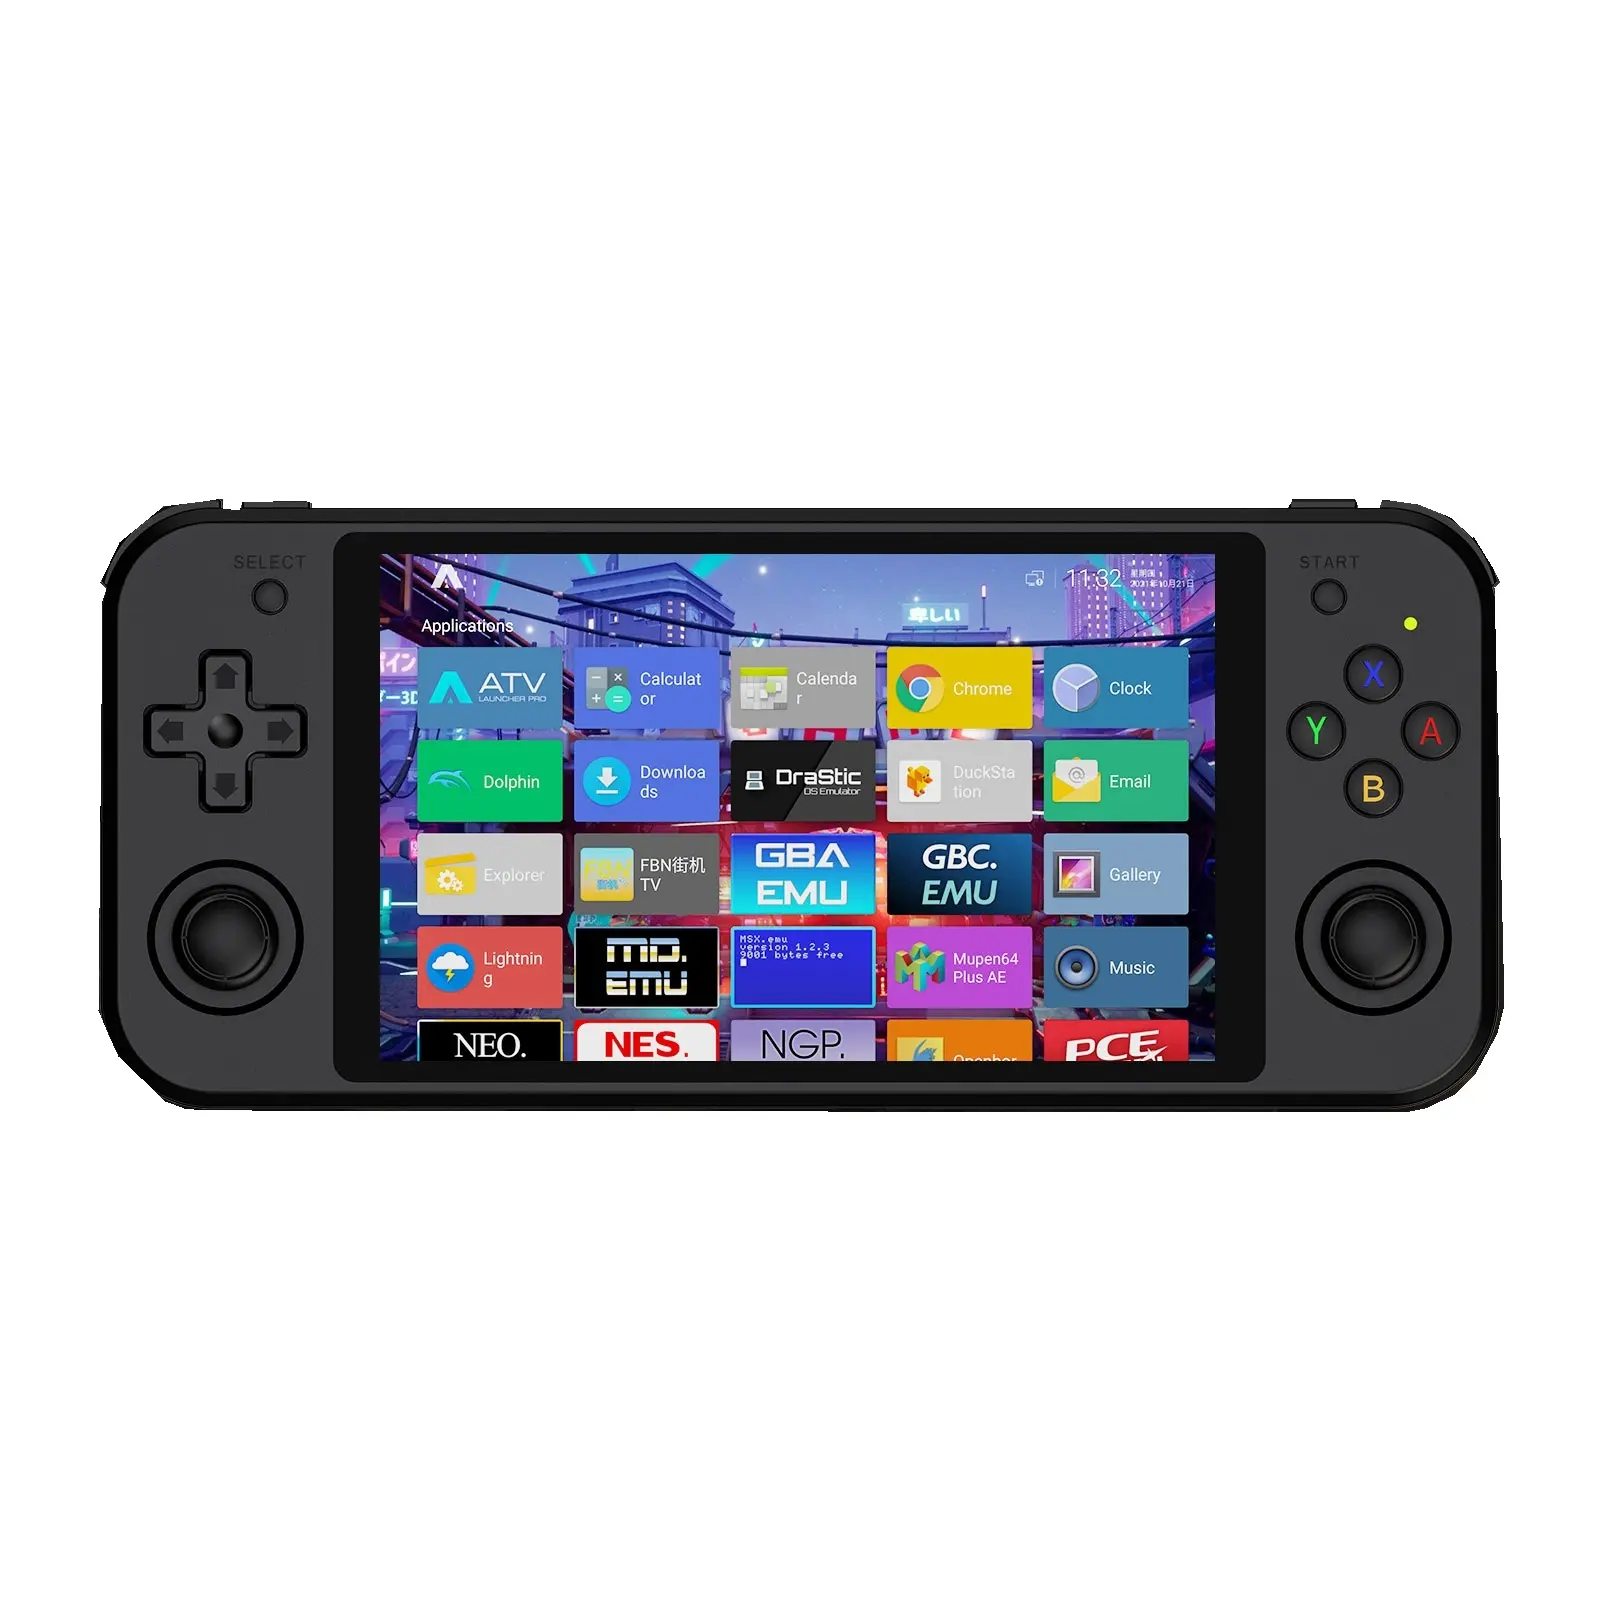 RG552 Handheld Game Player 5.36 Inch IPS Screen Dual System Android Linux RK3399 Console